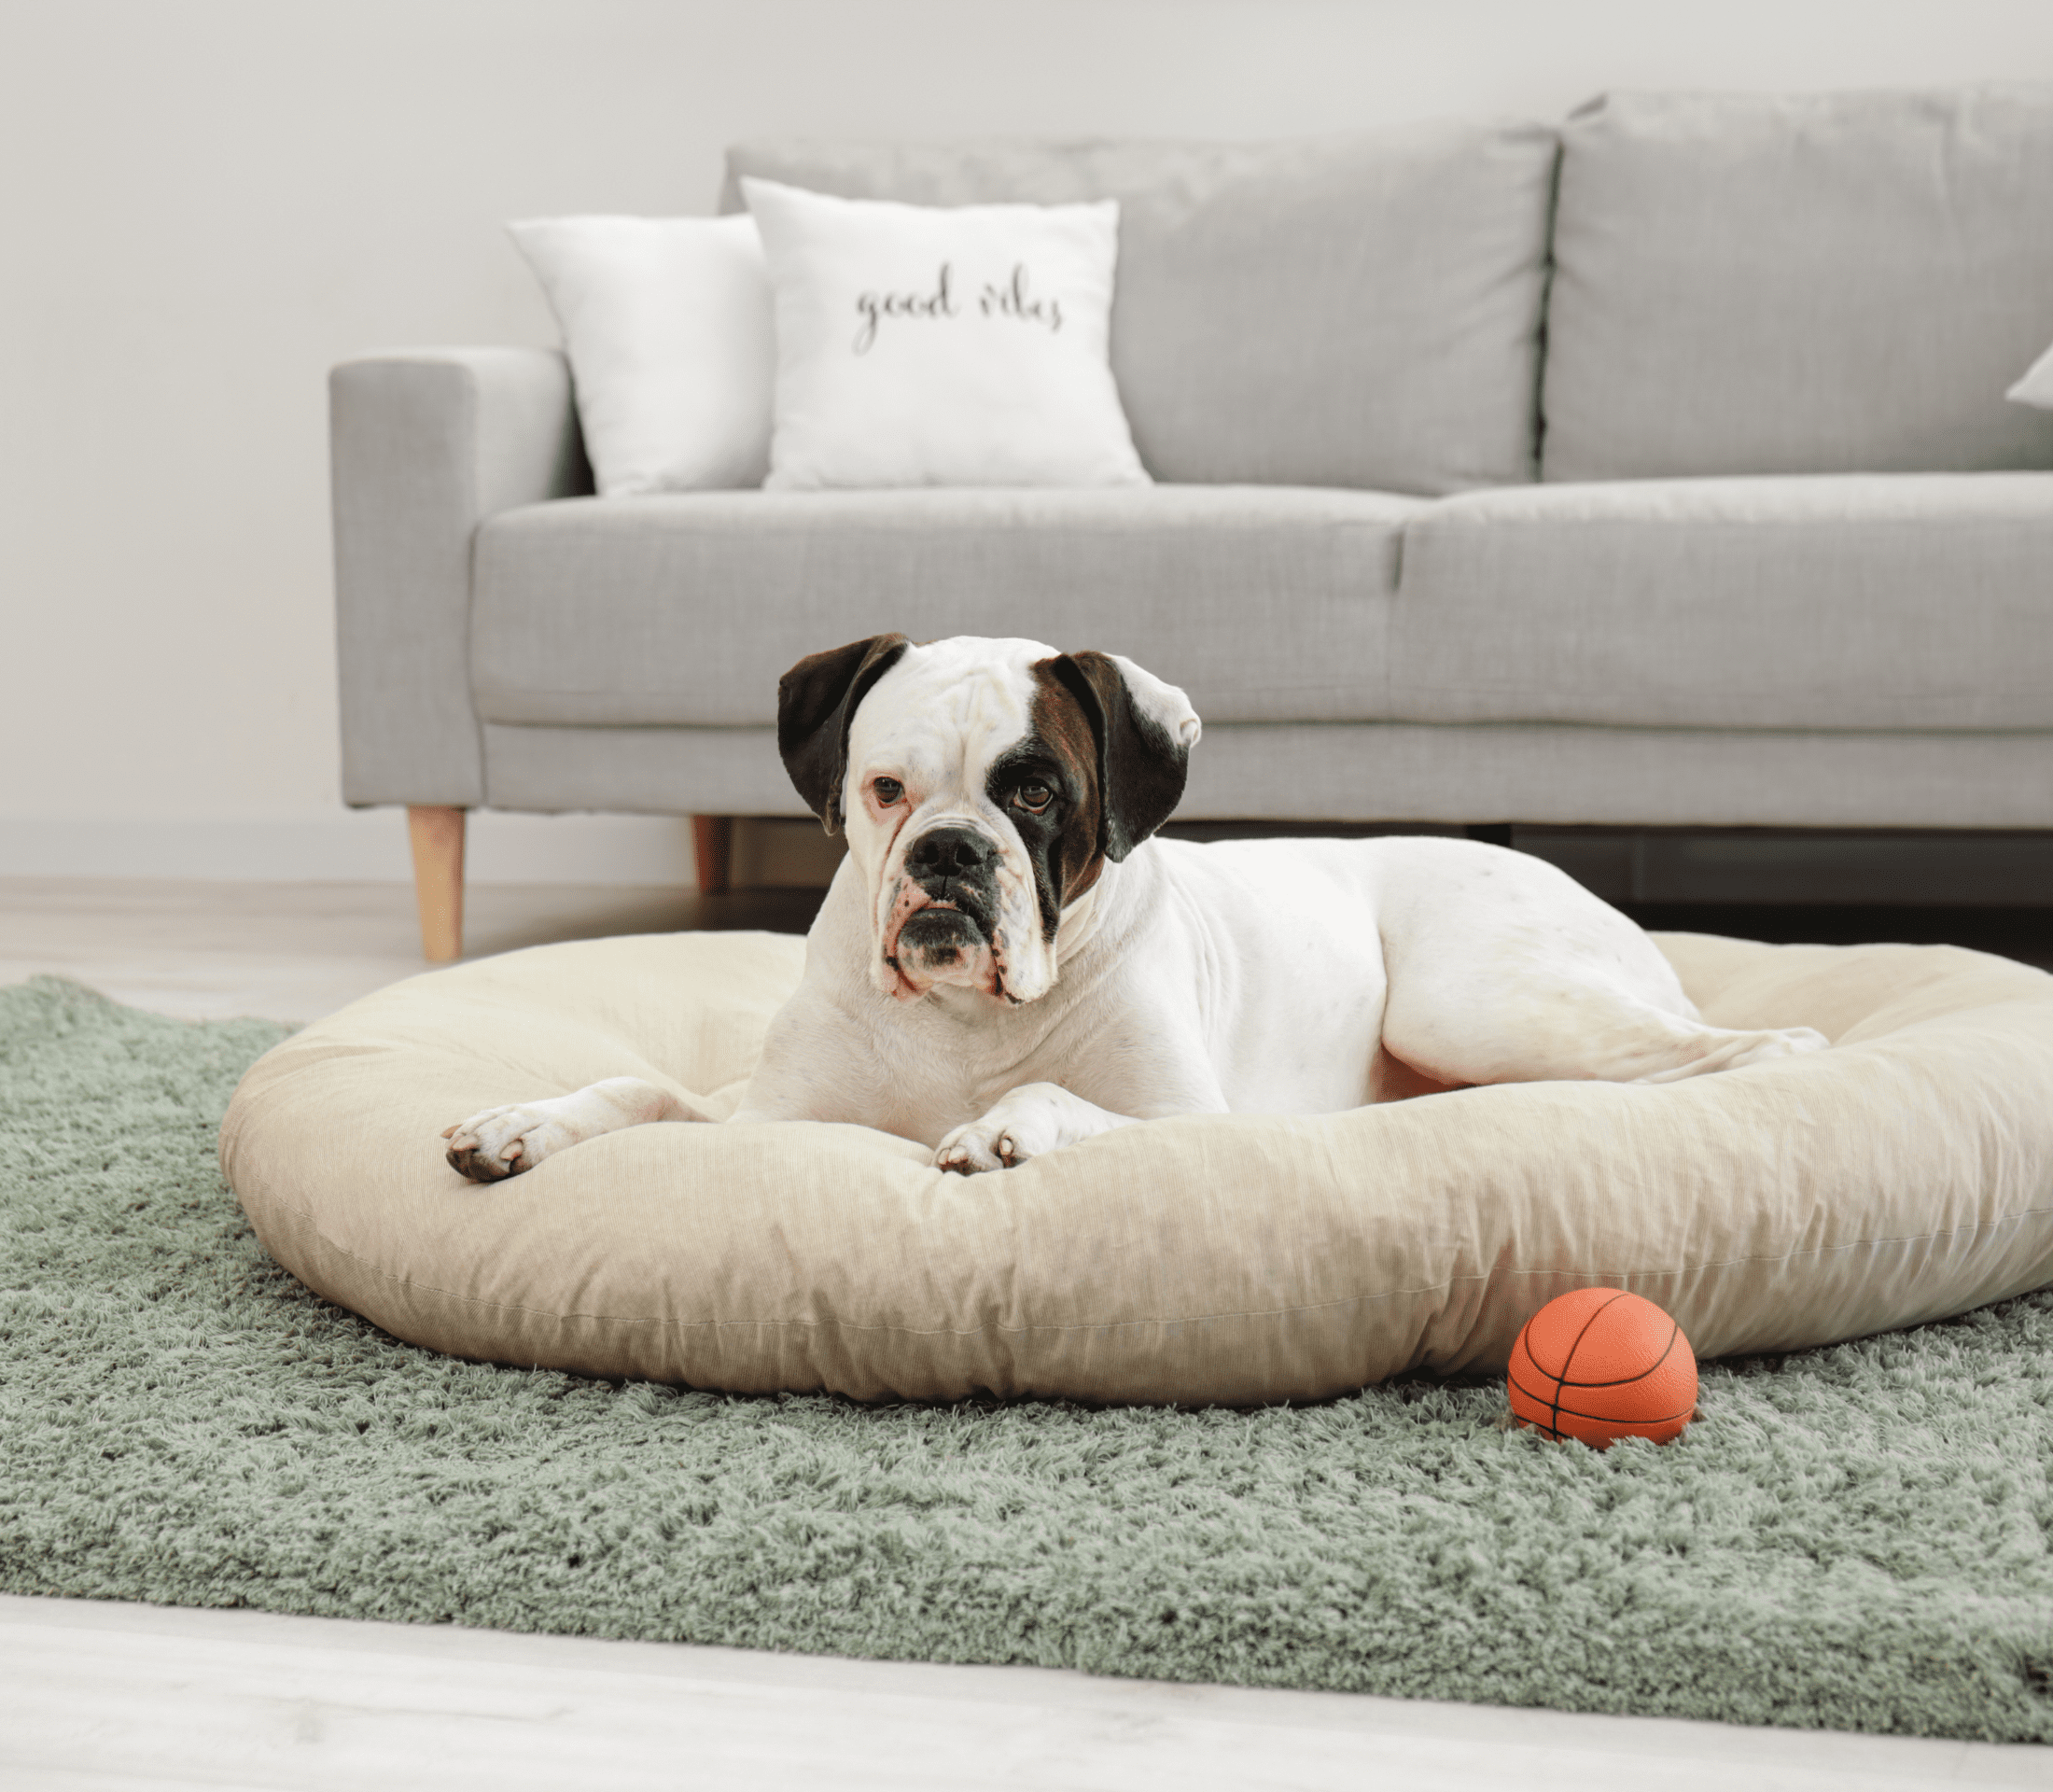 Bulldog on a white dog bed with gray couch at the back